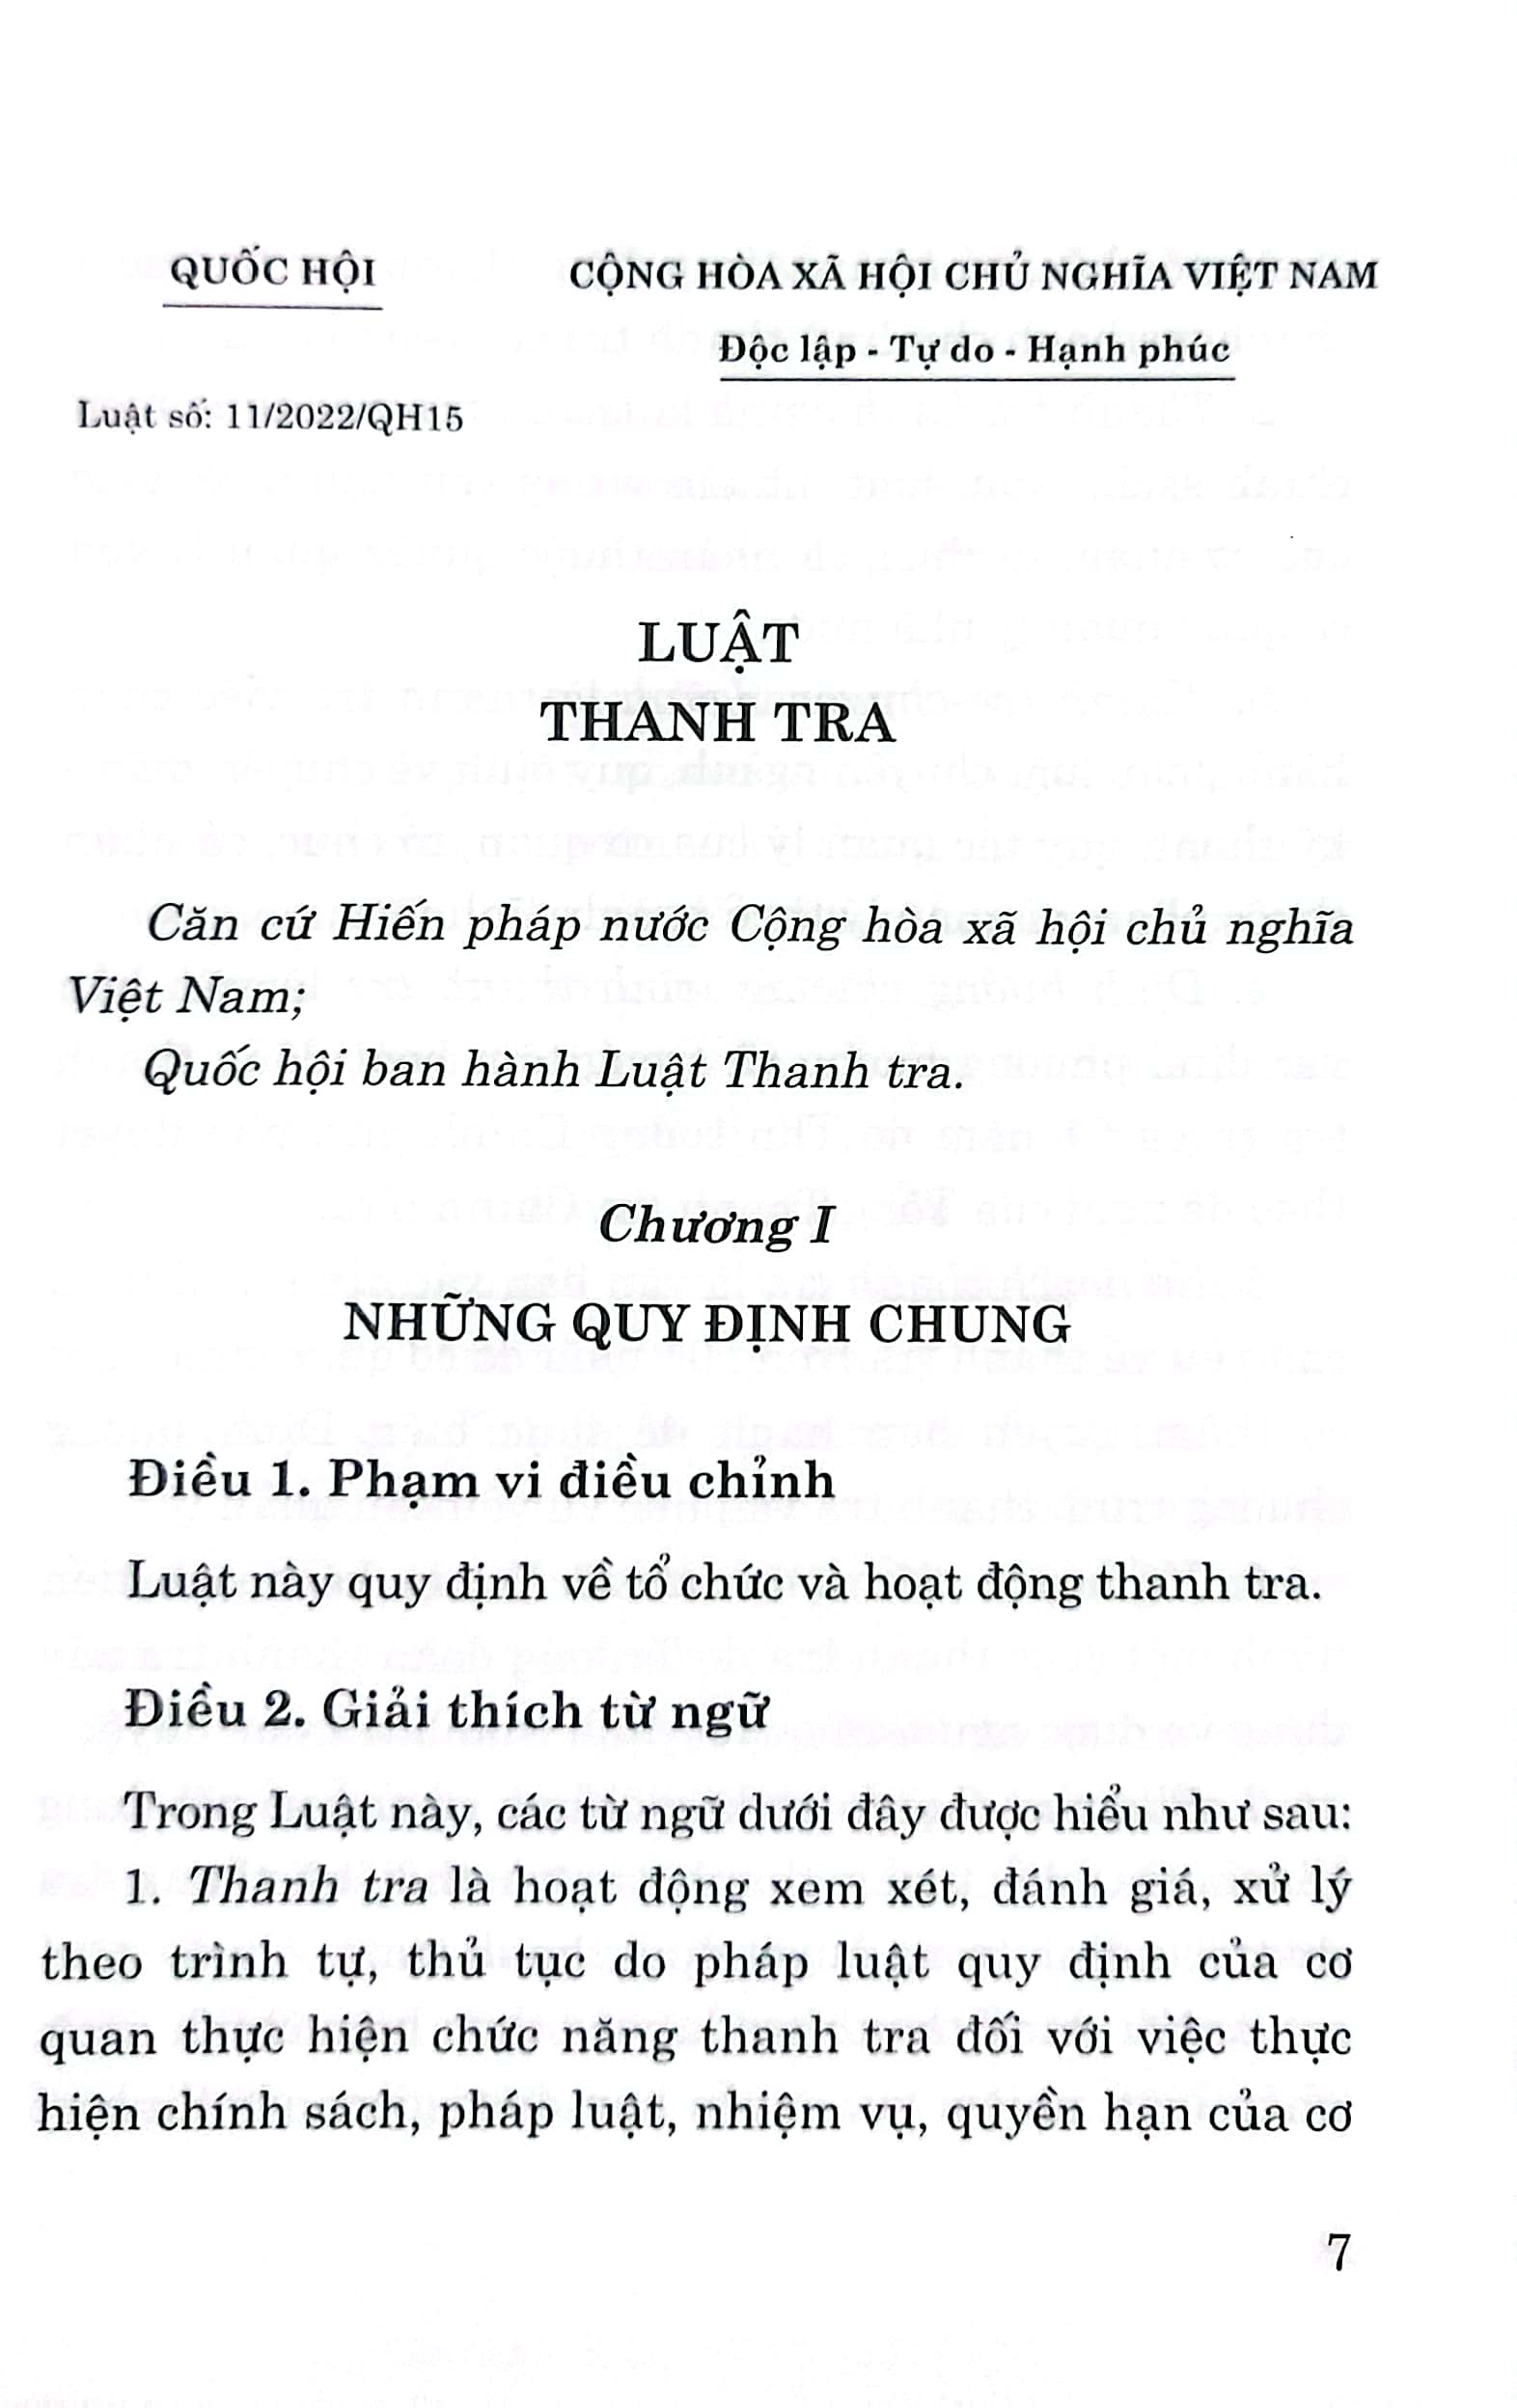 Luật Thanh tra